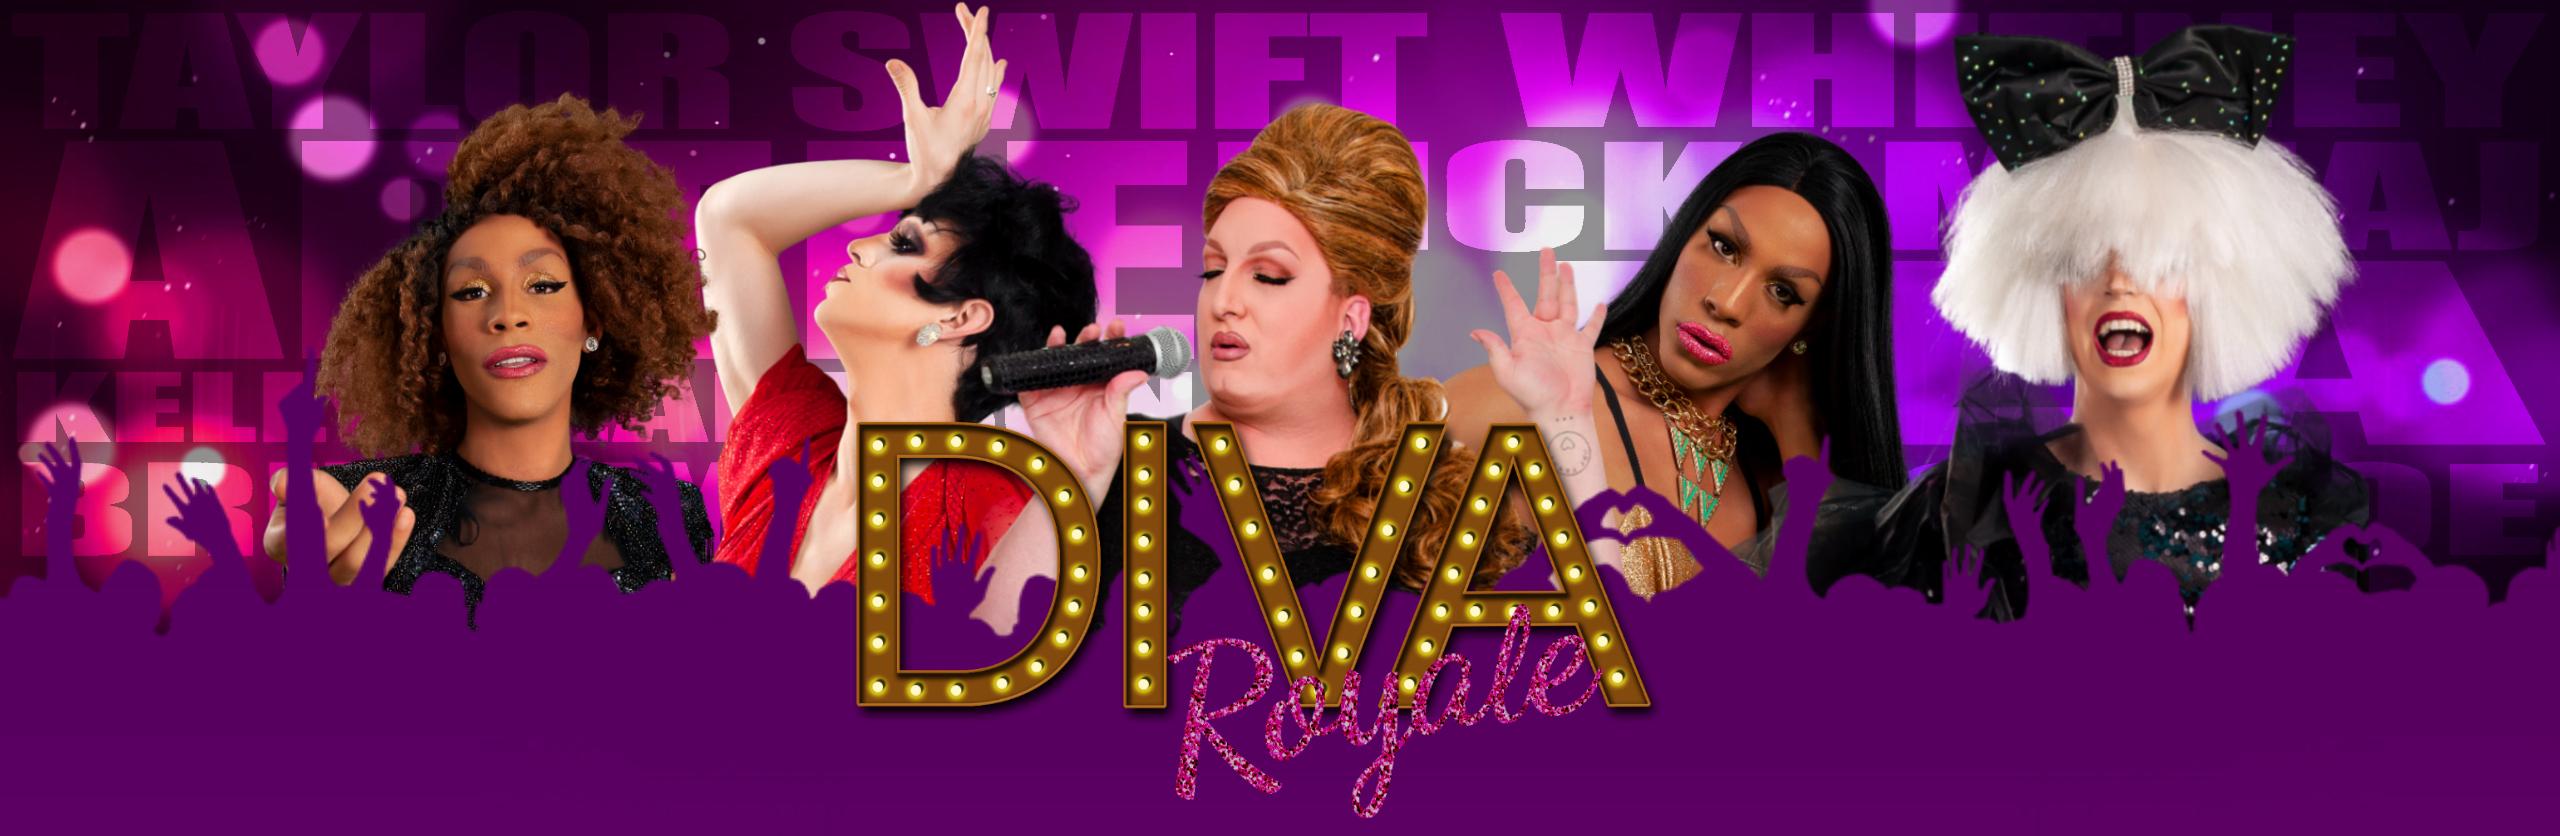 Diva Royale Drag Queen Show Los Angeles - Weekly Drag Queen Shows